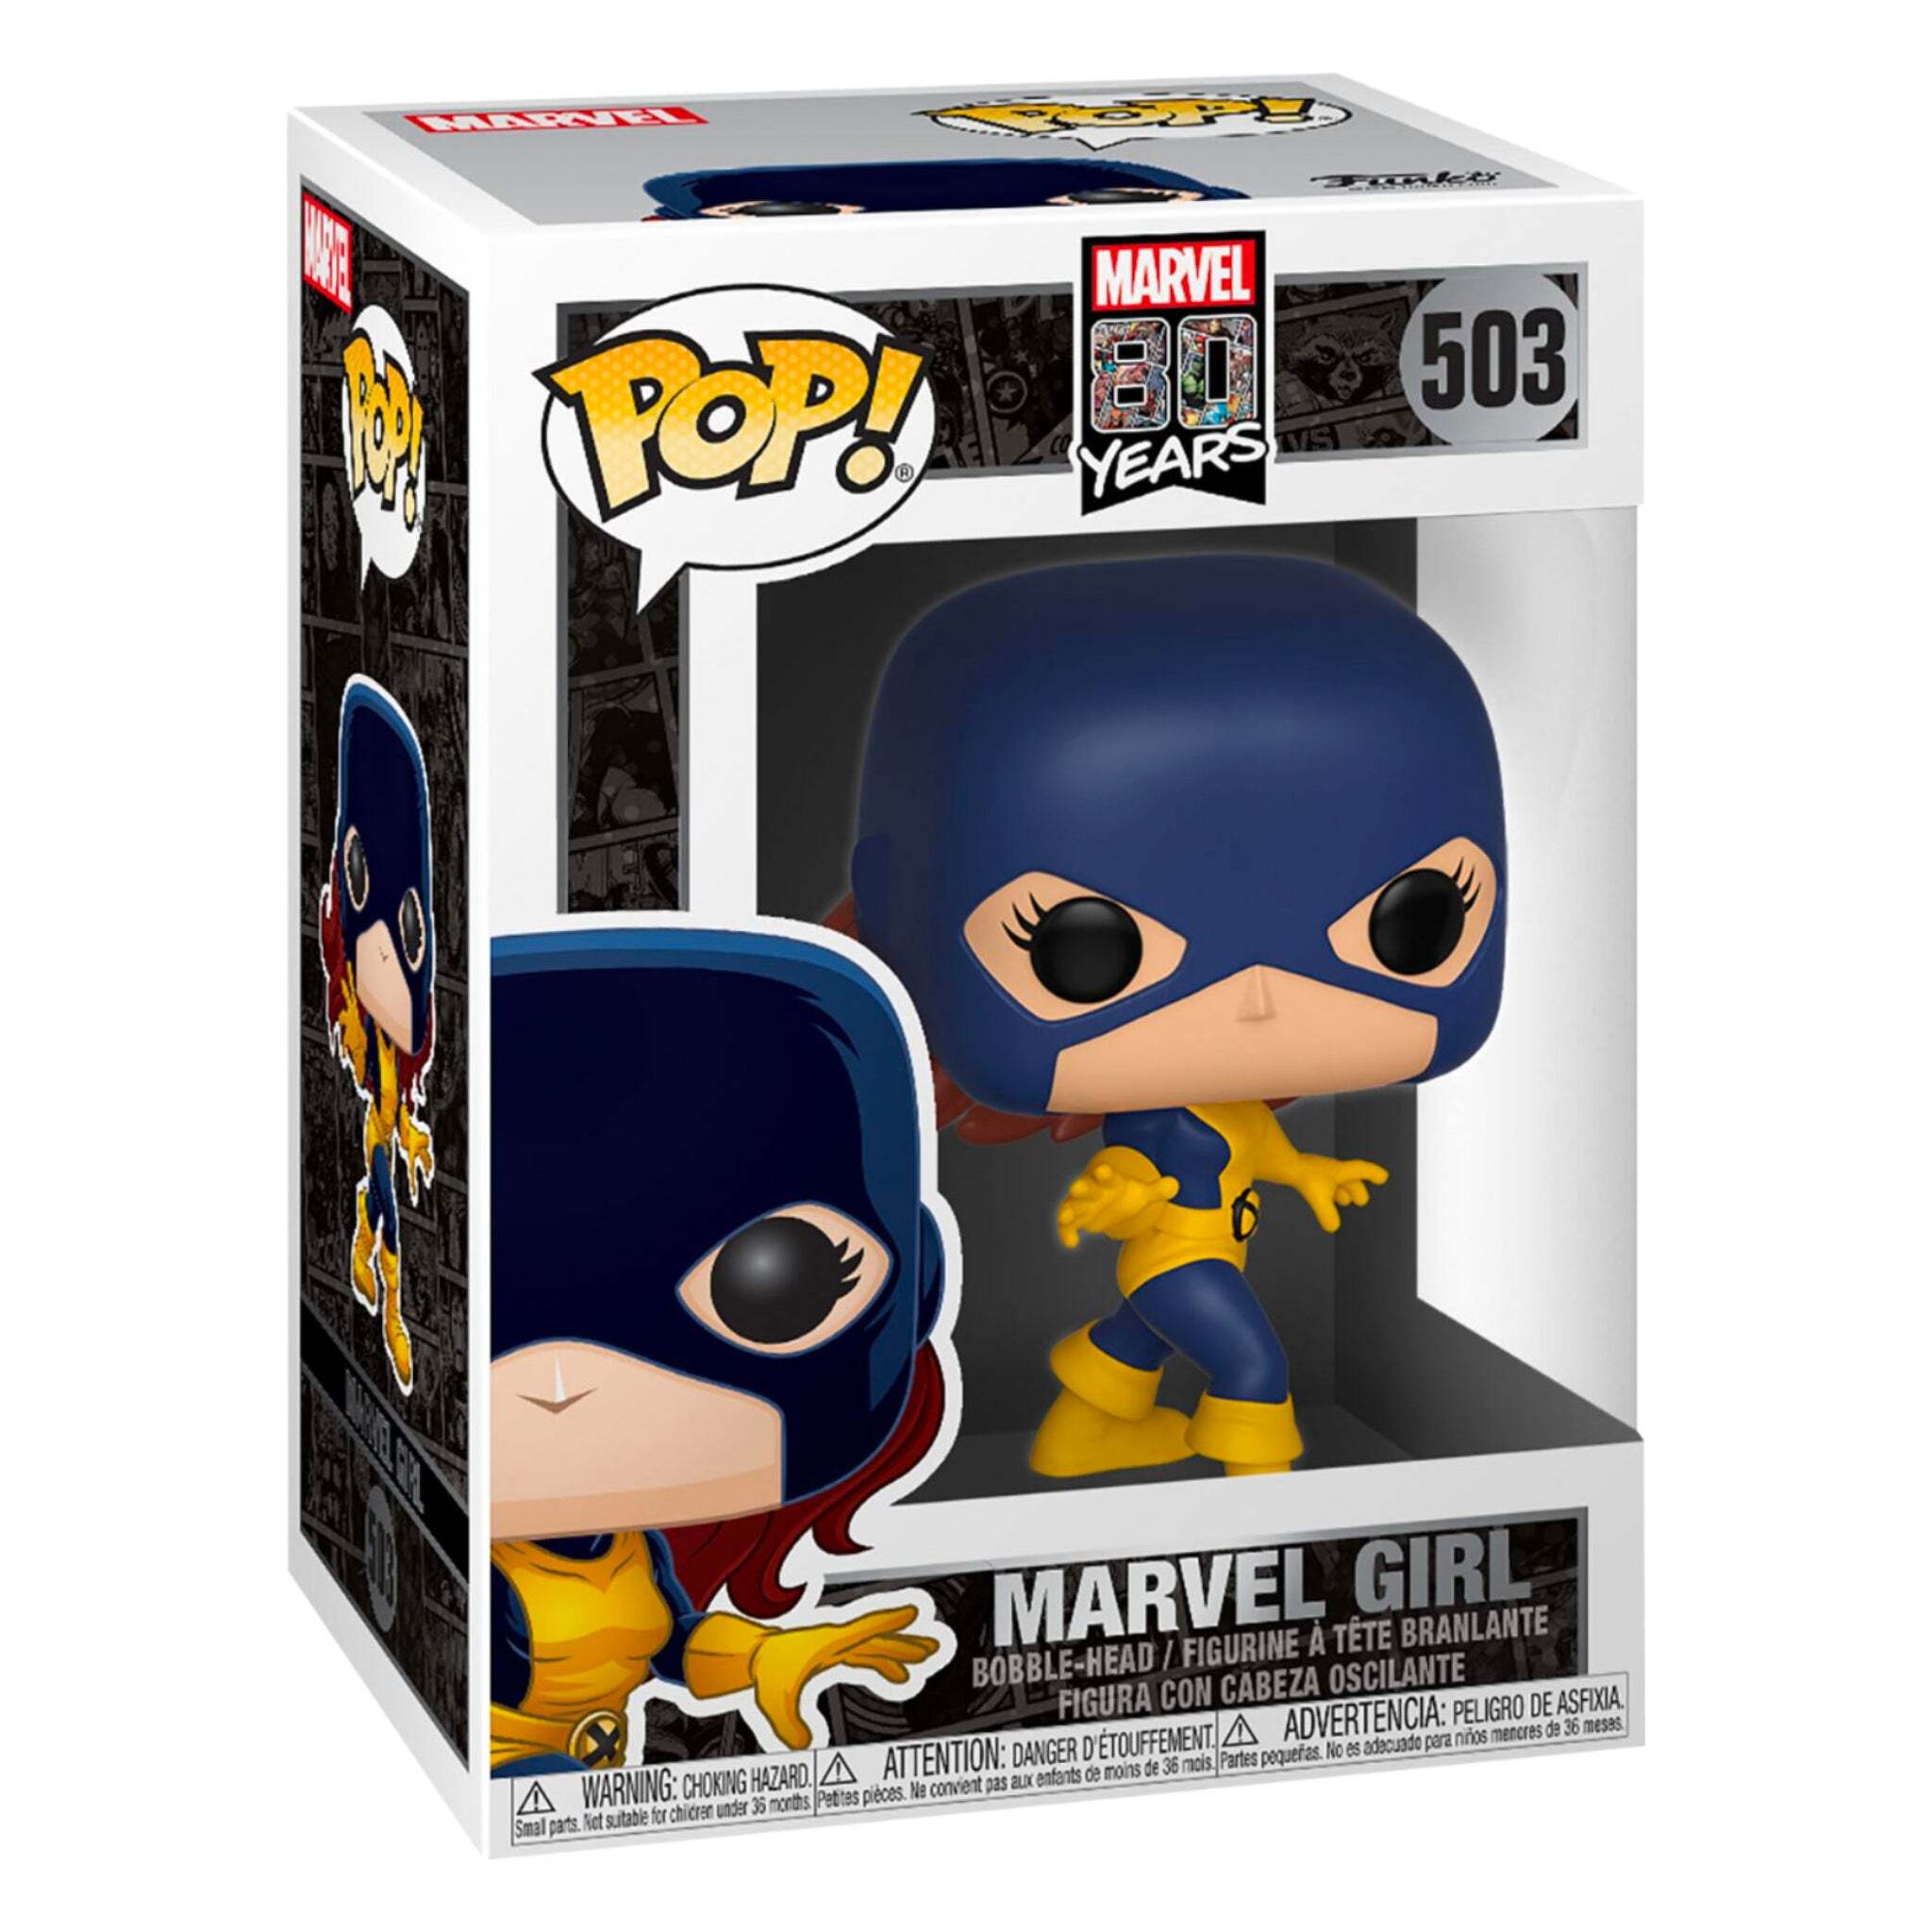 Marvel Girl (First Appearance) Funko Pop!